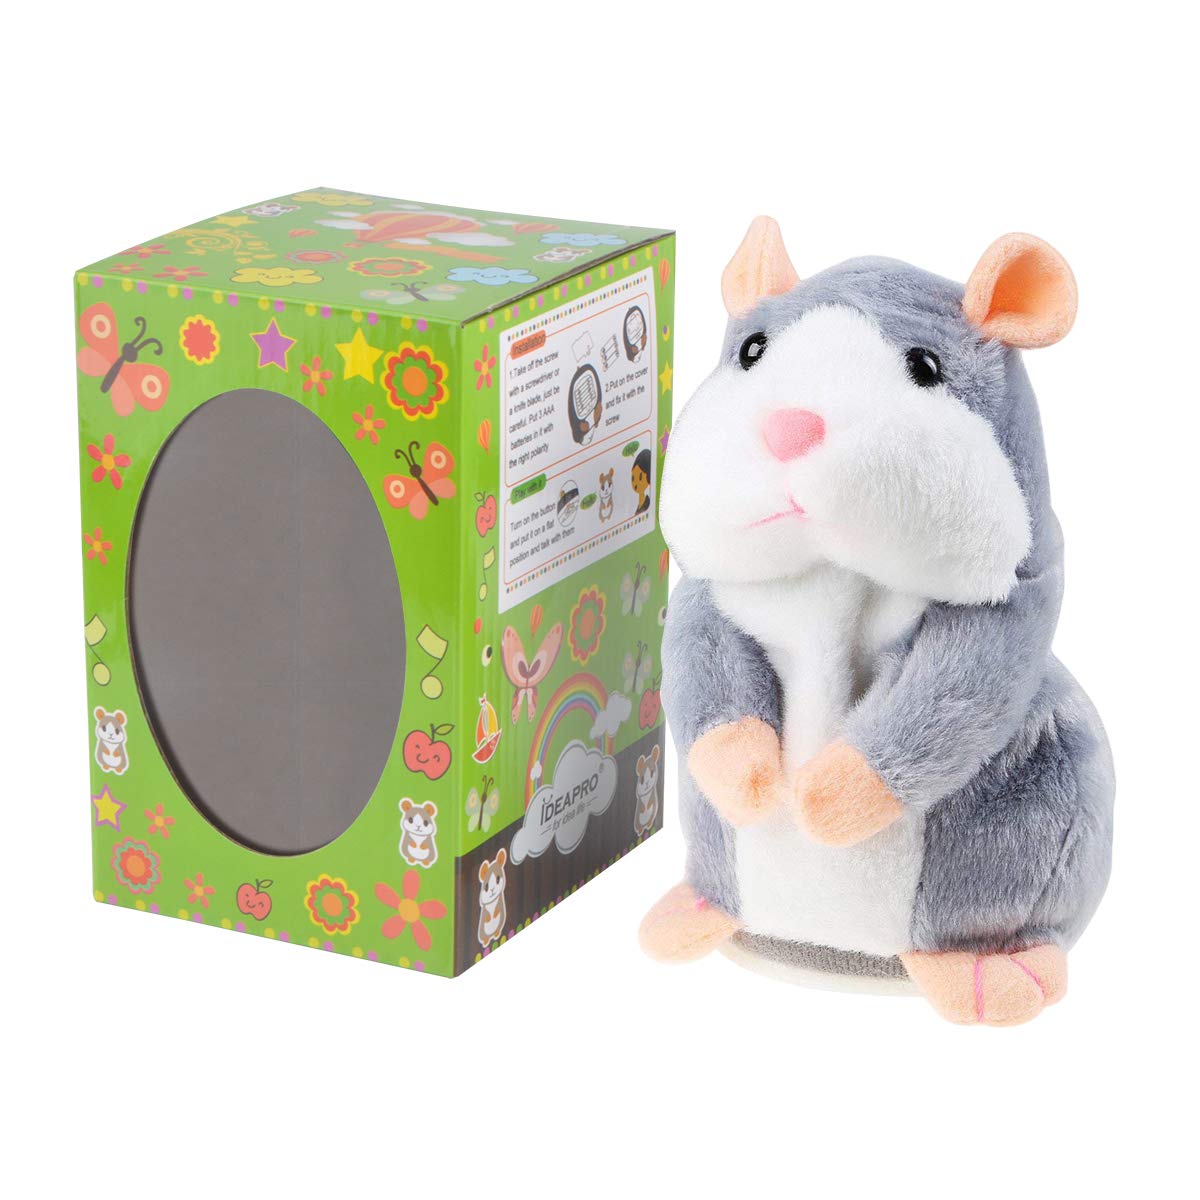 Talking Hamster Plush Toy, Repeat What You Say Funny Kids Stuffed Toys, Talking Record Plush Interactive Toys for, Birthday Gift Kids Early Learning